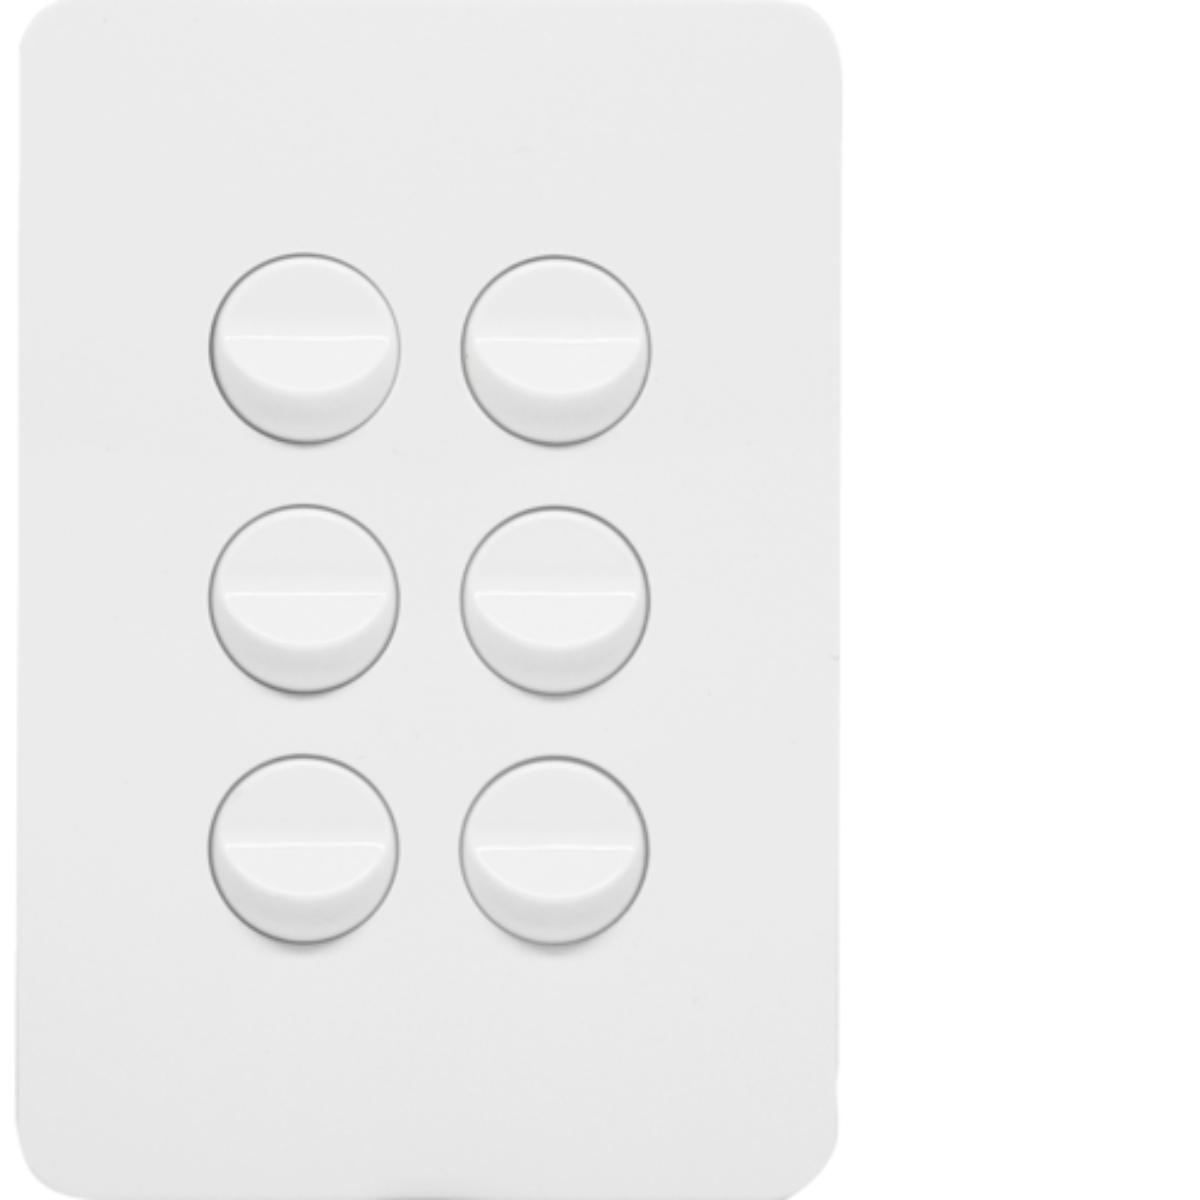 ALLURE 6 GANG SWITCH 16A 2WAY GLOSS WHT